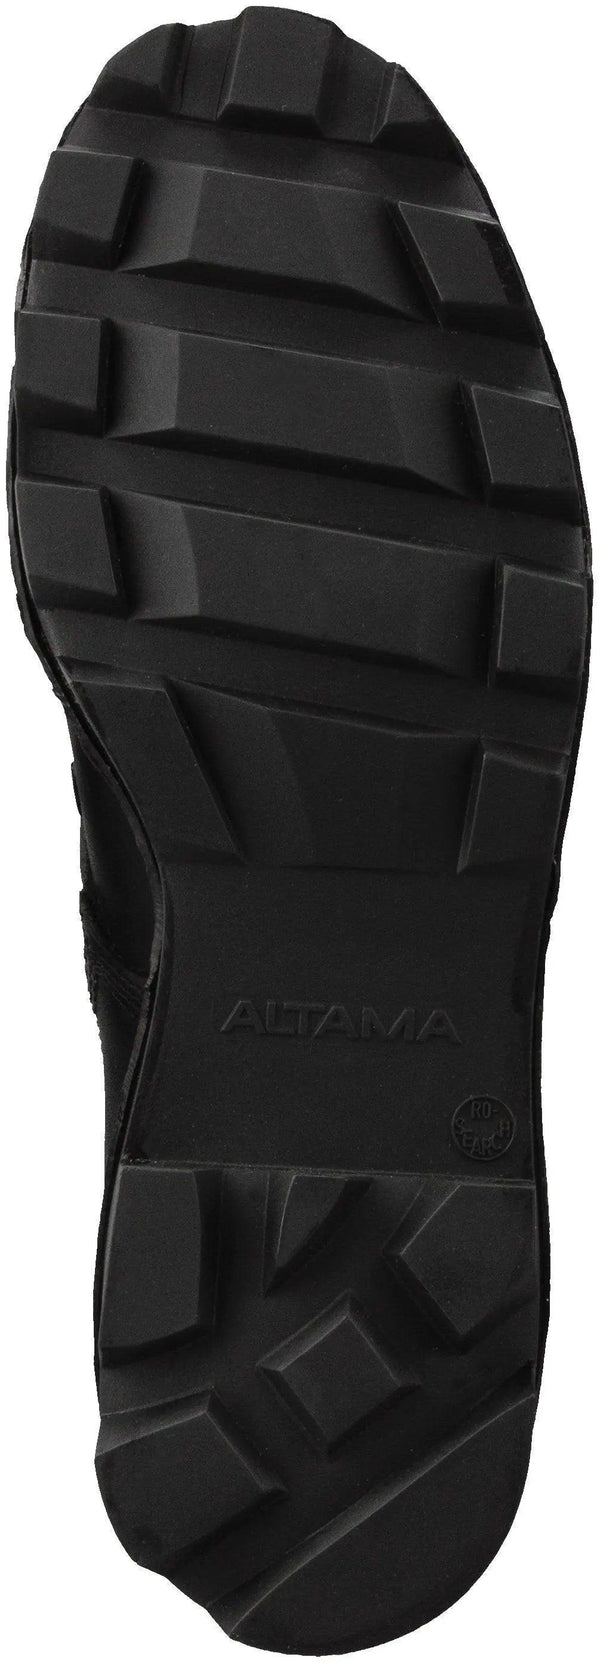 ALTAMA Hot Weather 10.5 Inch Black Jungle Boot  315501 - BootSolution